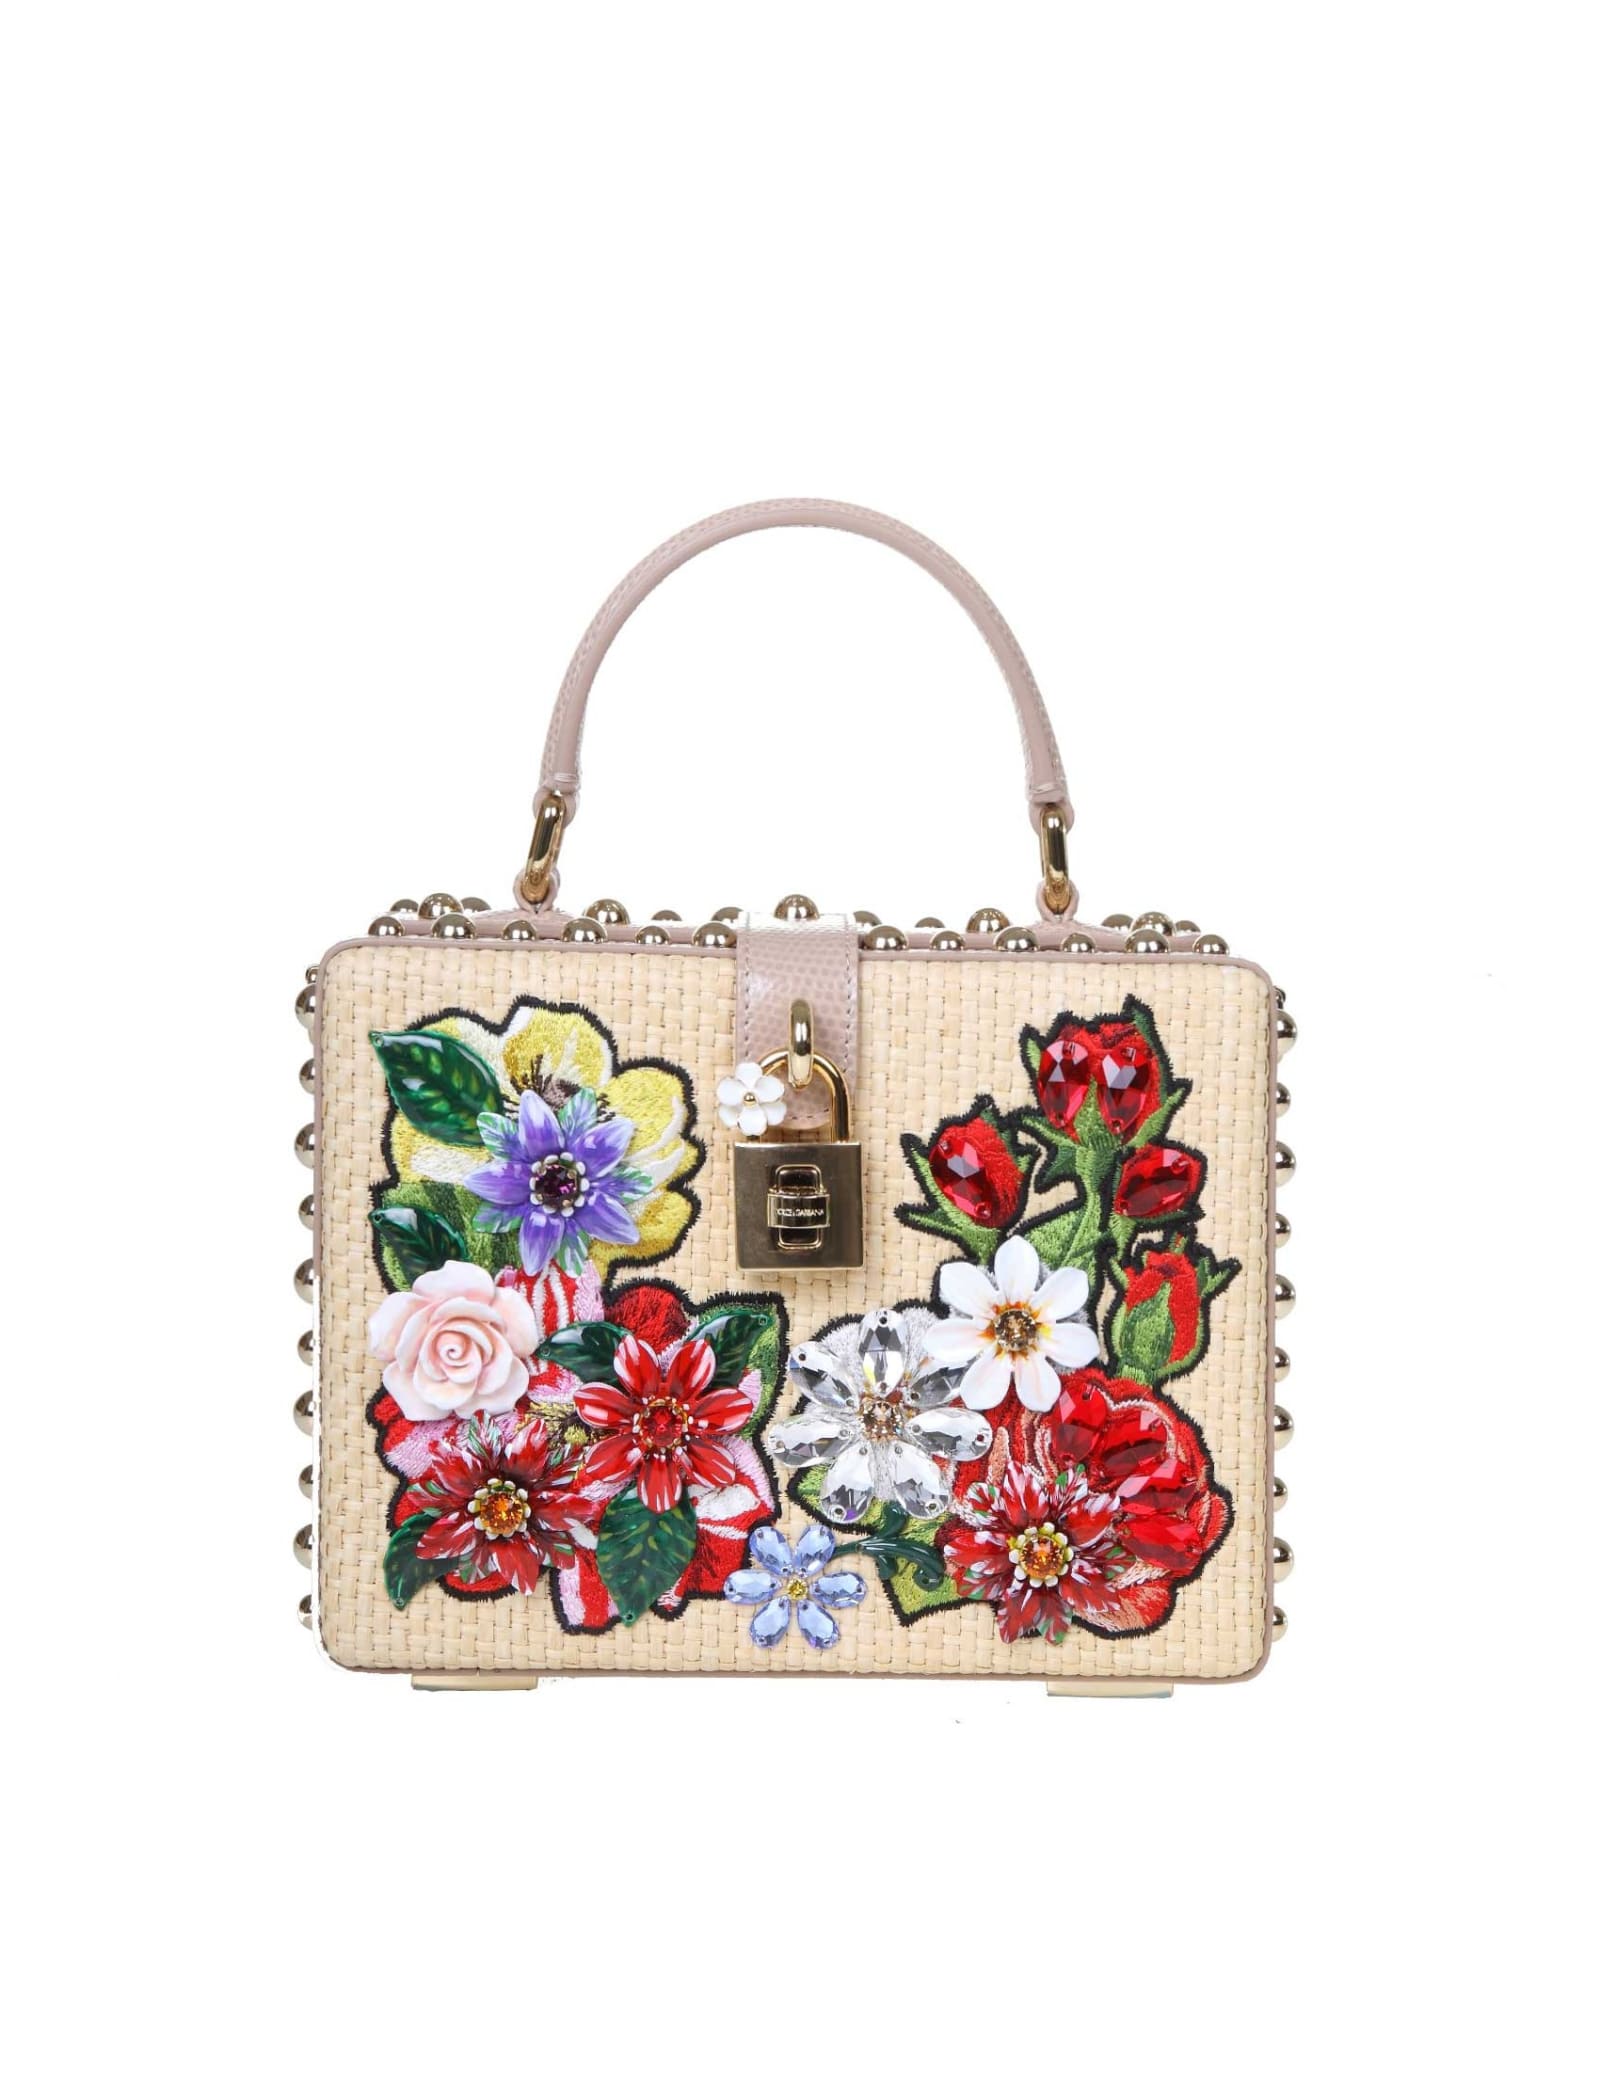 DOLCE & GABBANA HANDBAG BOX IN RAFFIA AND LEATHER WITH FLORAL DETAILS,11244810